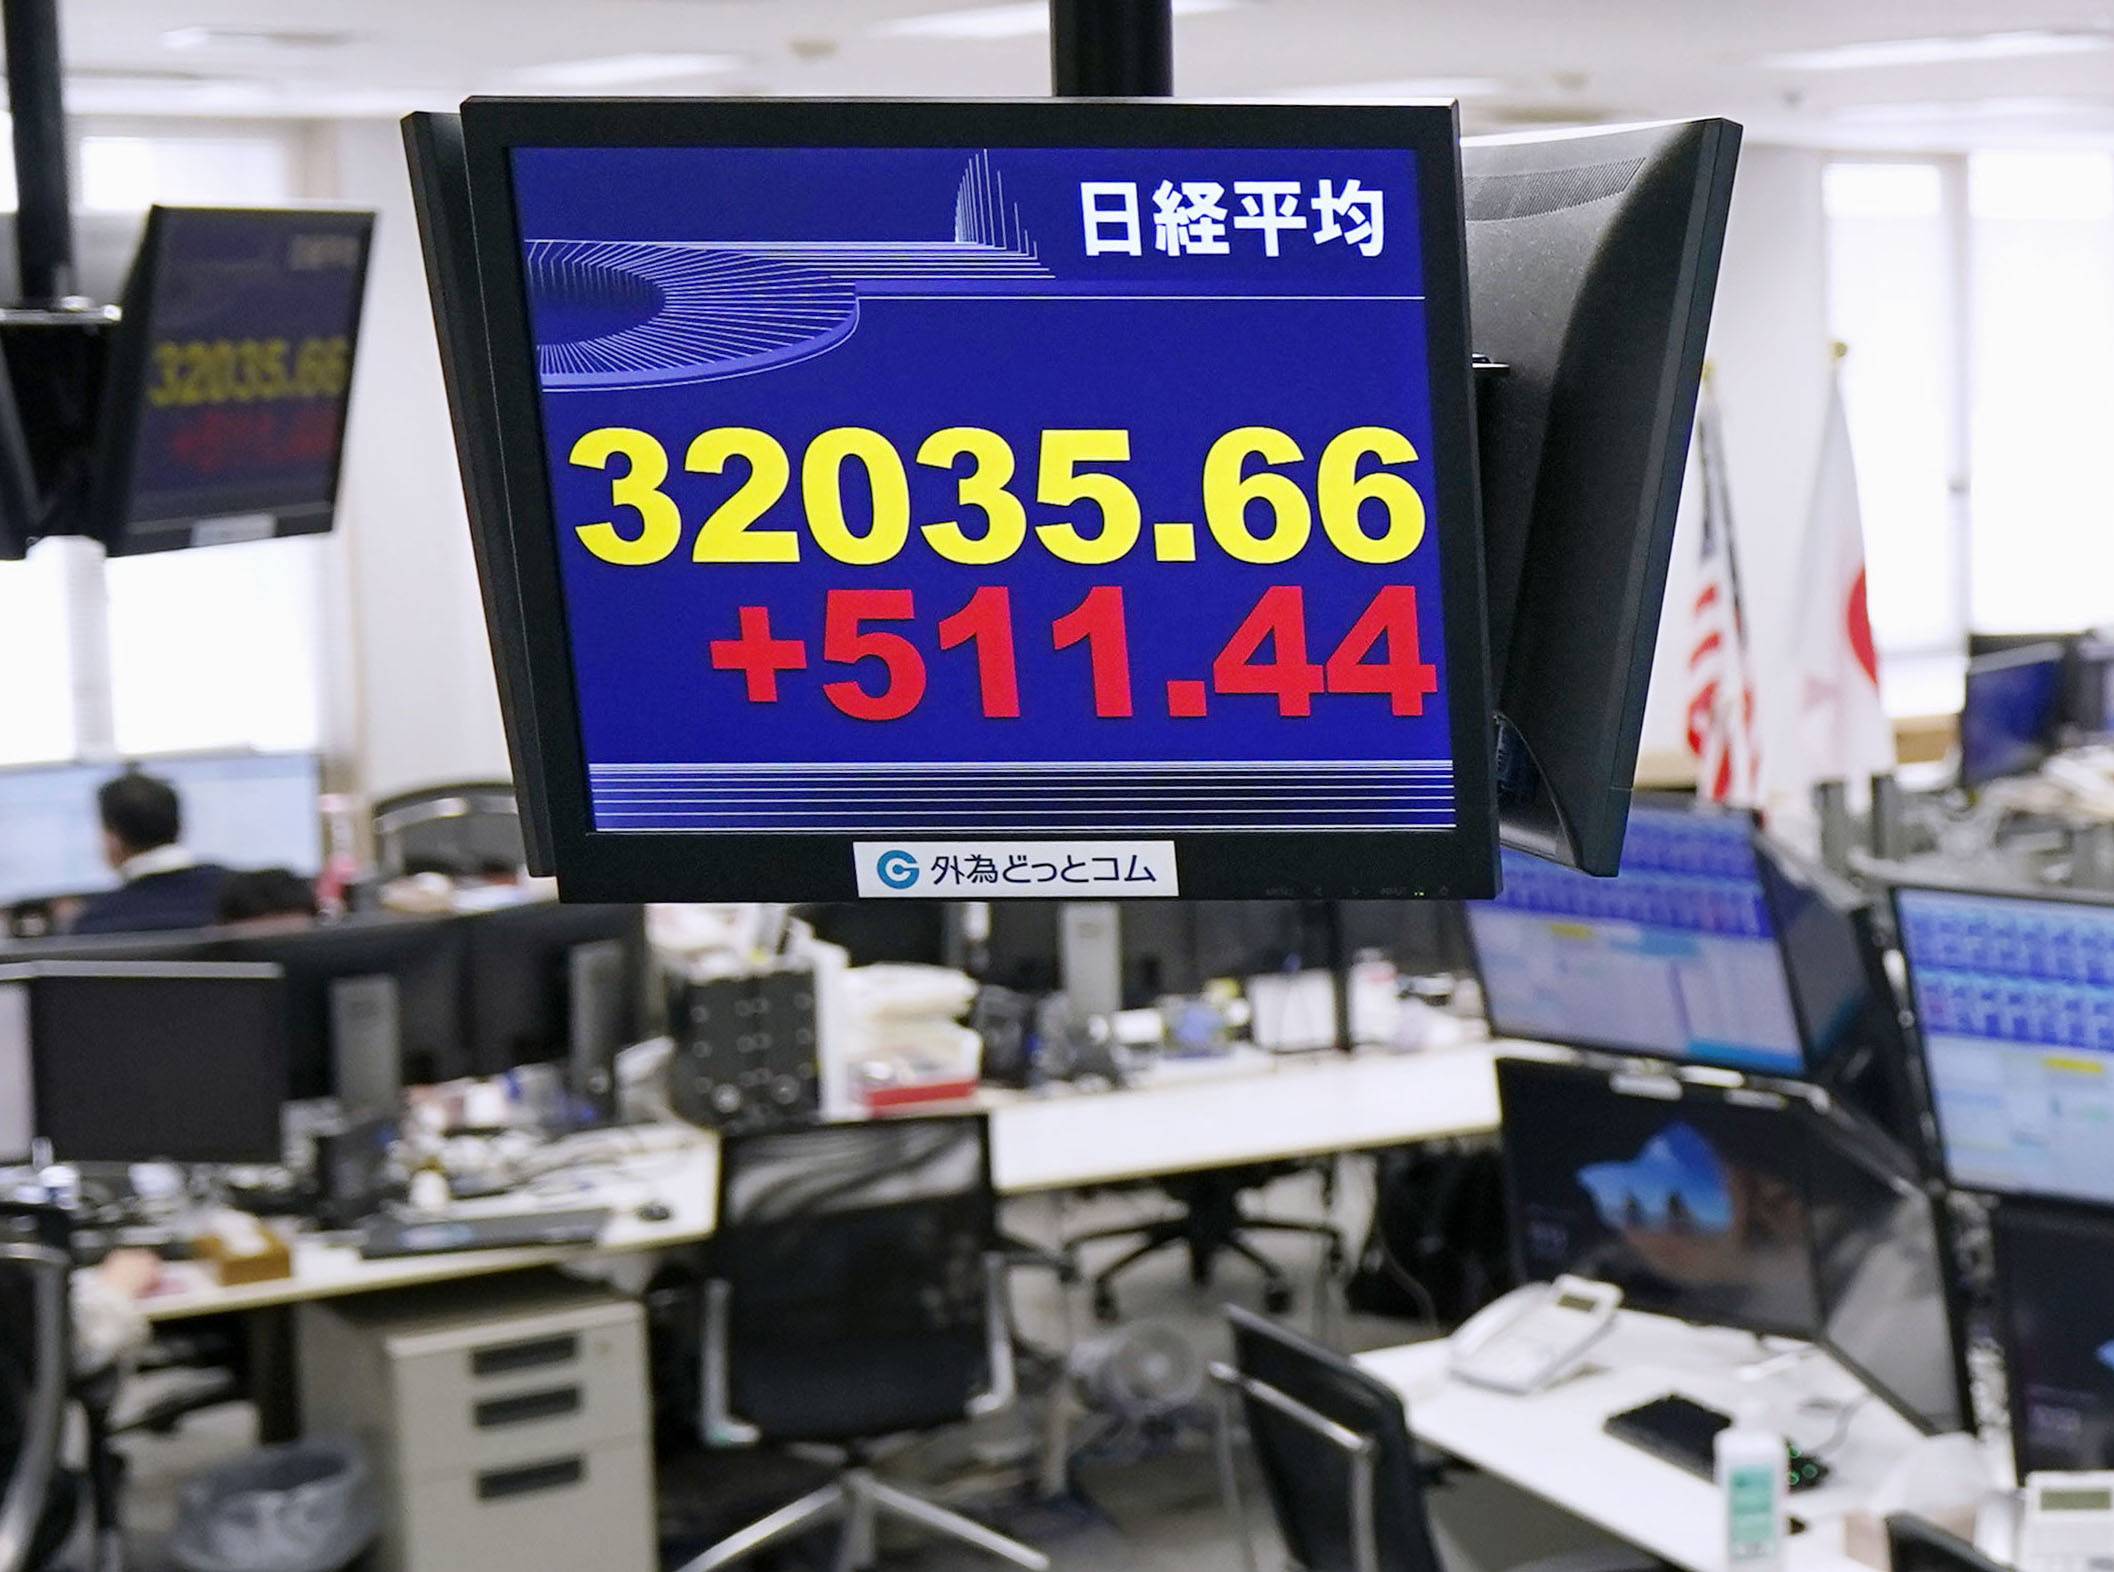 A monitor at a brokerage in Tokyo shows the Nikkei stock average topping the 32,000 mark during morning trading on Monday. | KYODO